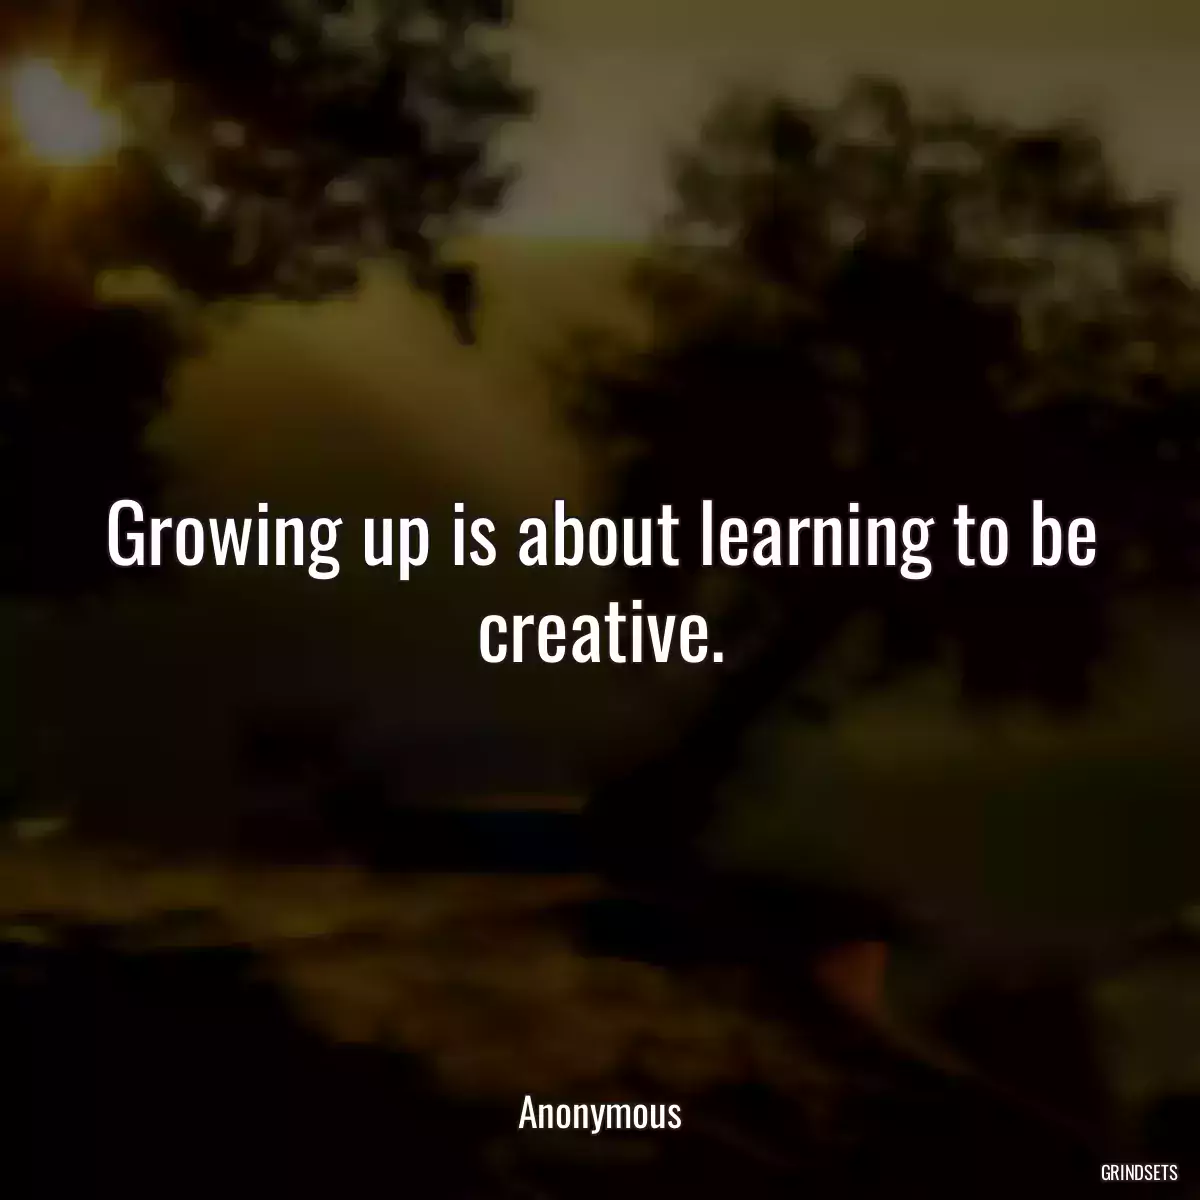 Growing up is about learning to be creative.